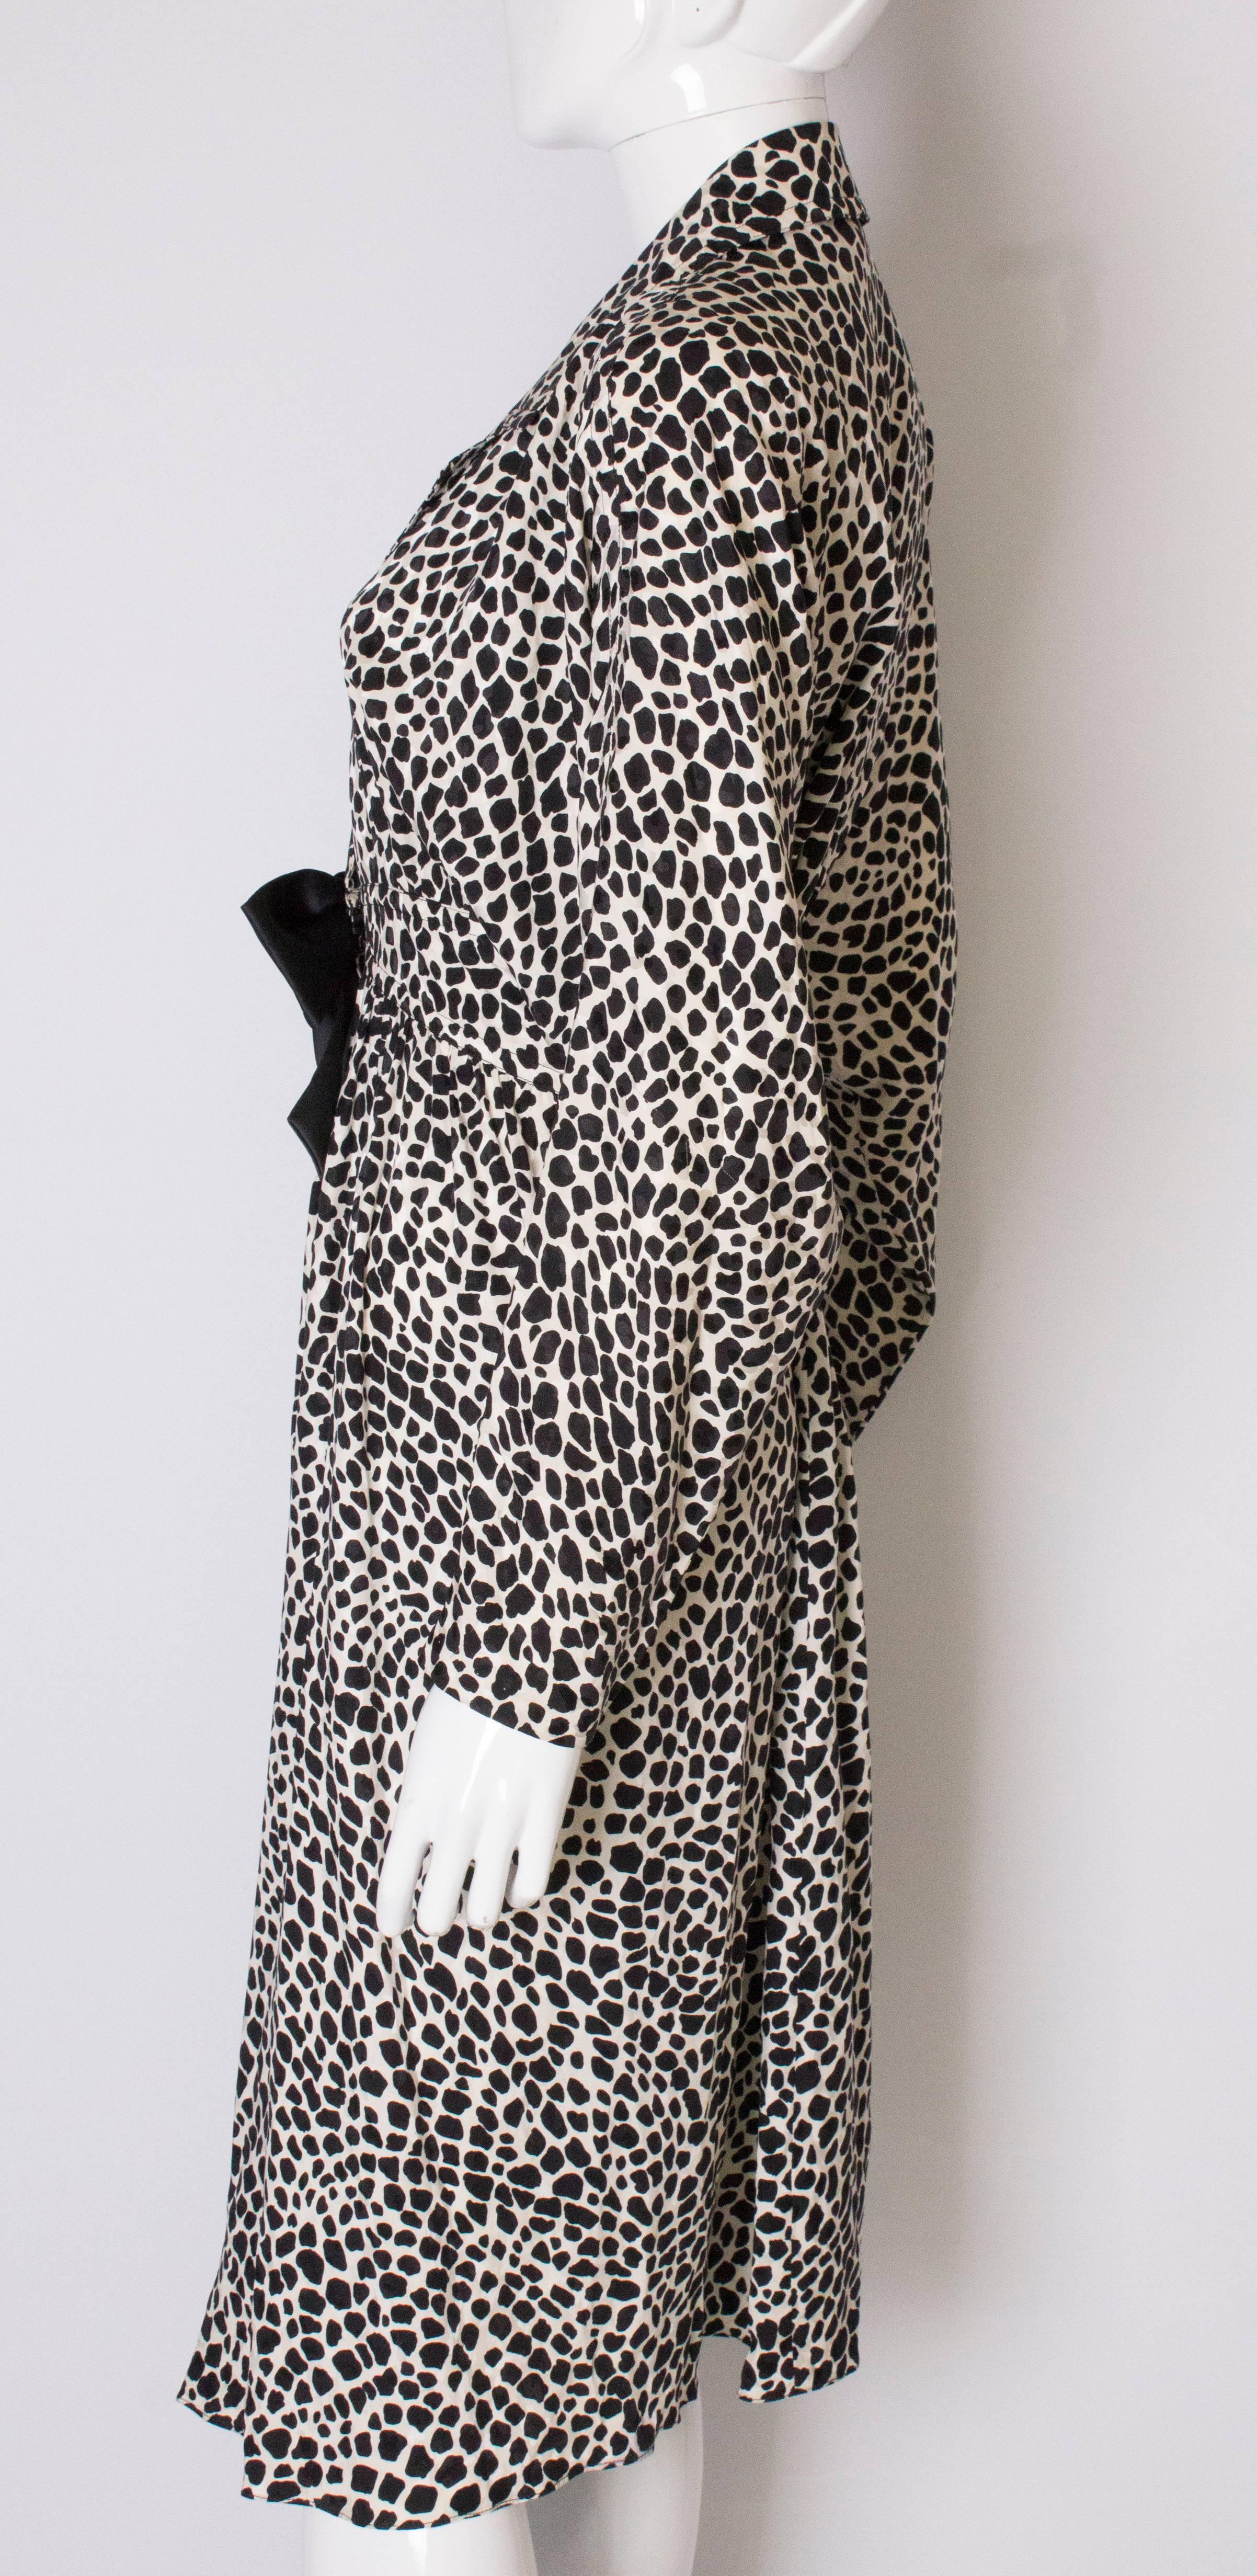 A Vintage 1980s Black and White printed Dress with bow detail by Adele Simpson 2